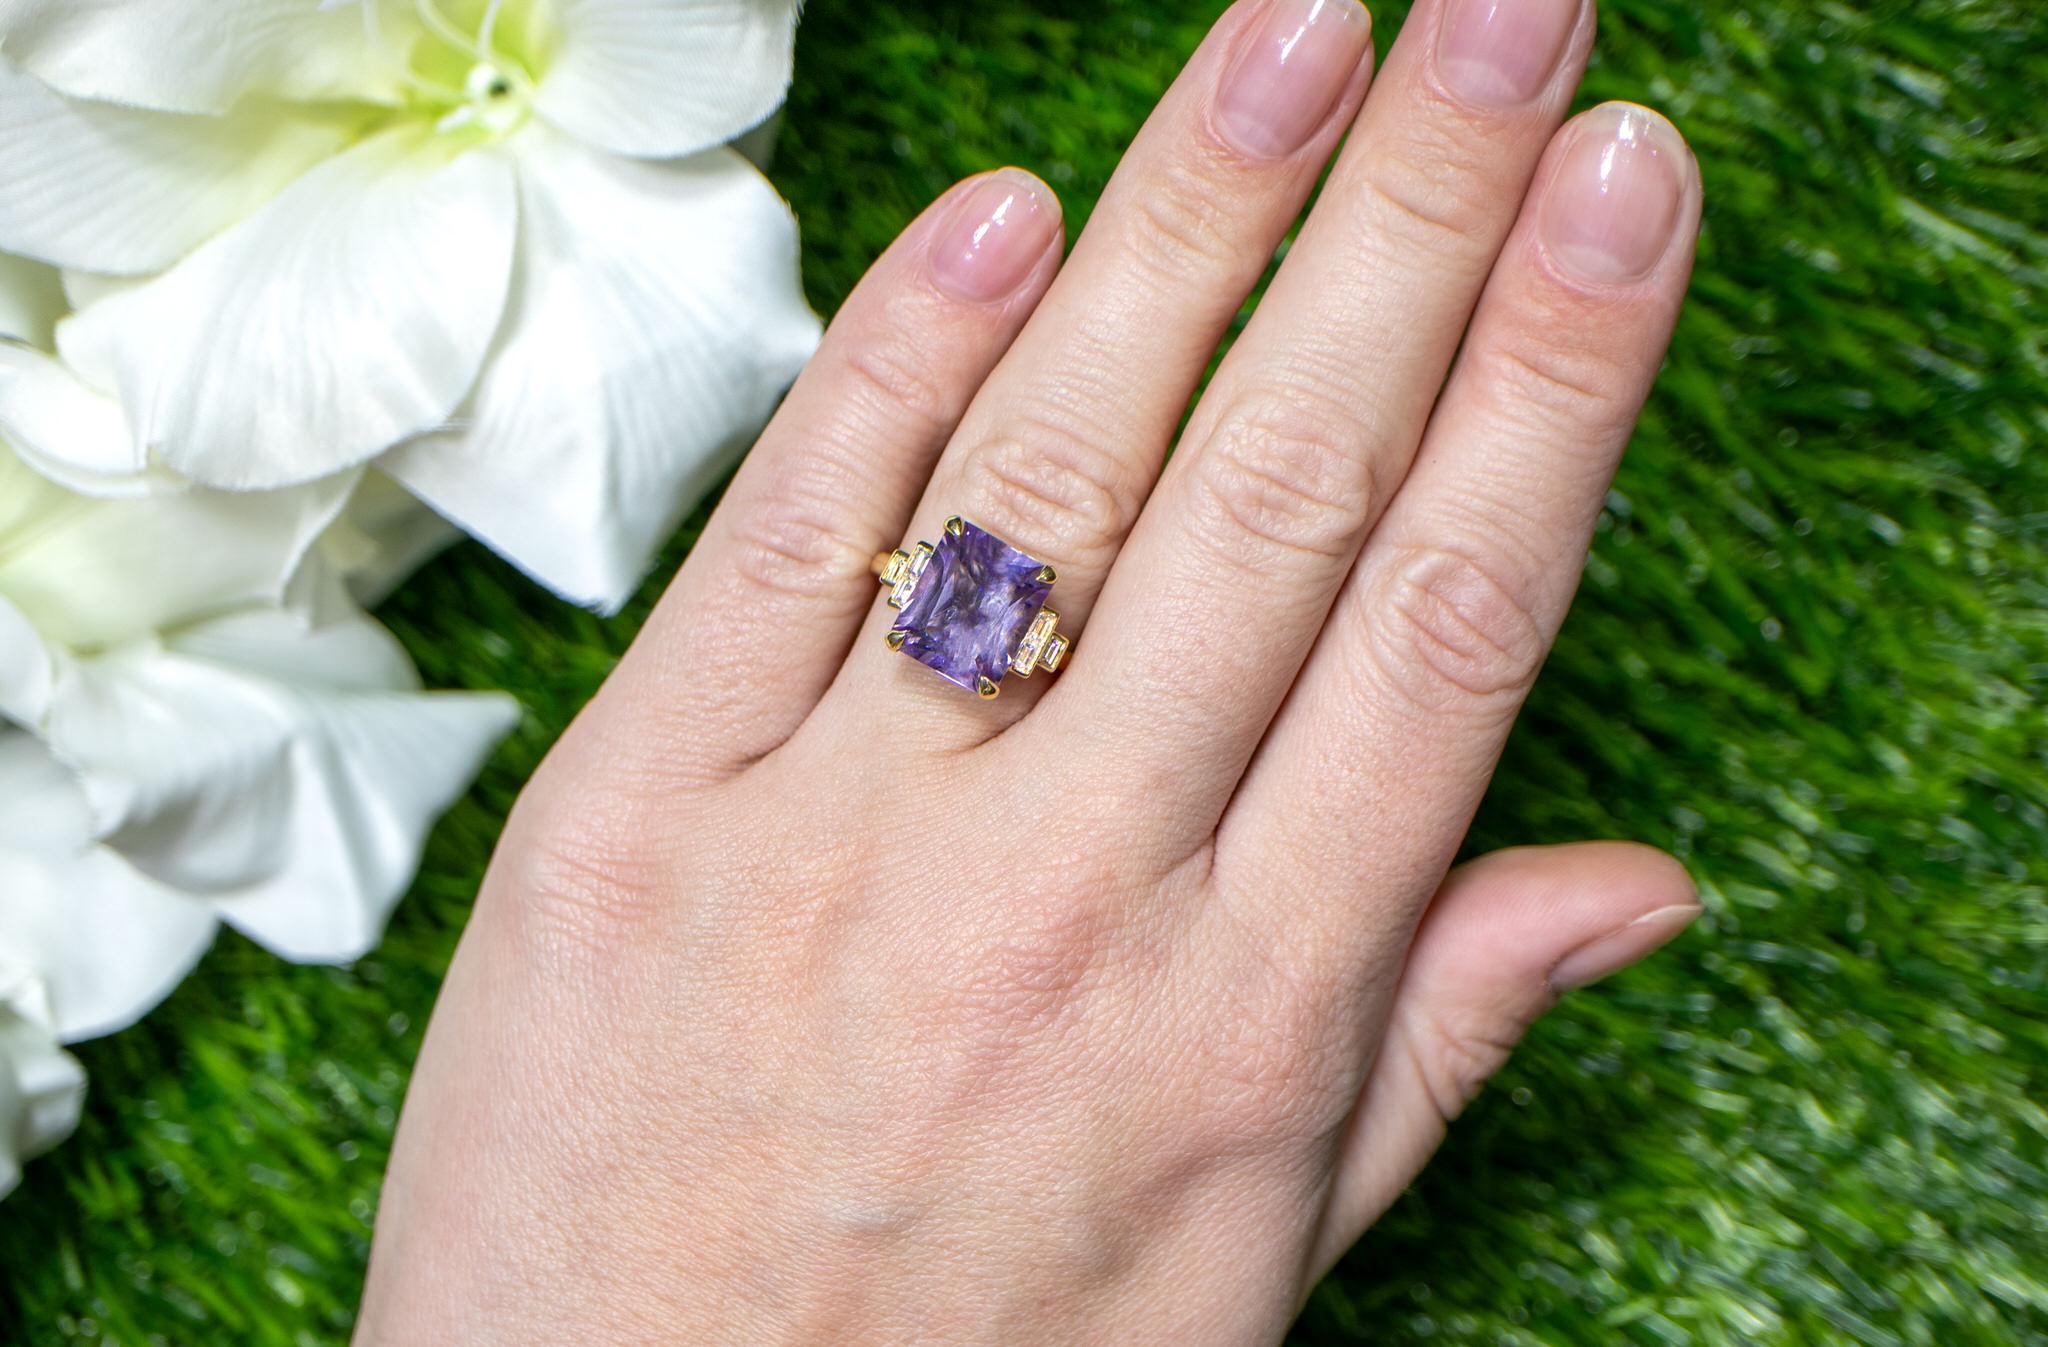 Octagon Cut Lavender Amethyst Ring Diamond Setting 5.65 Carats 18K Gold For Sale